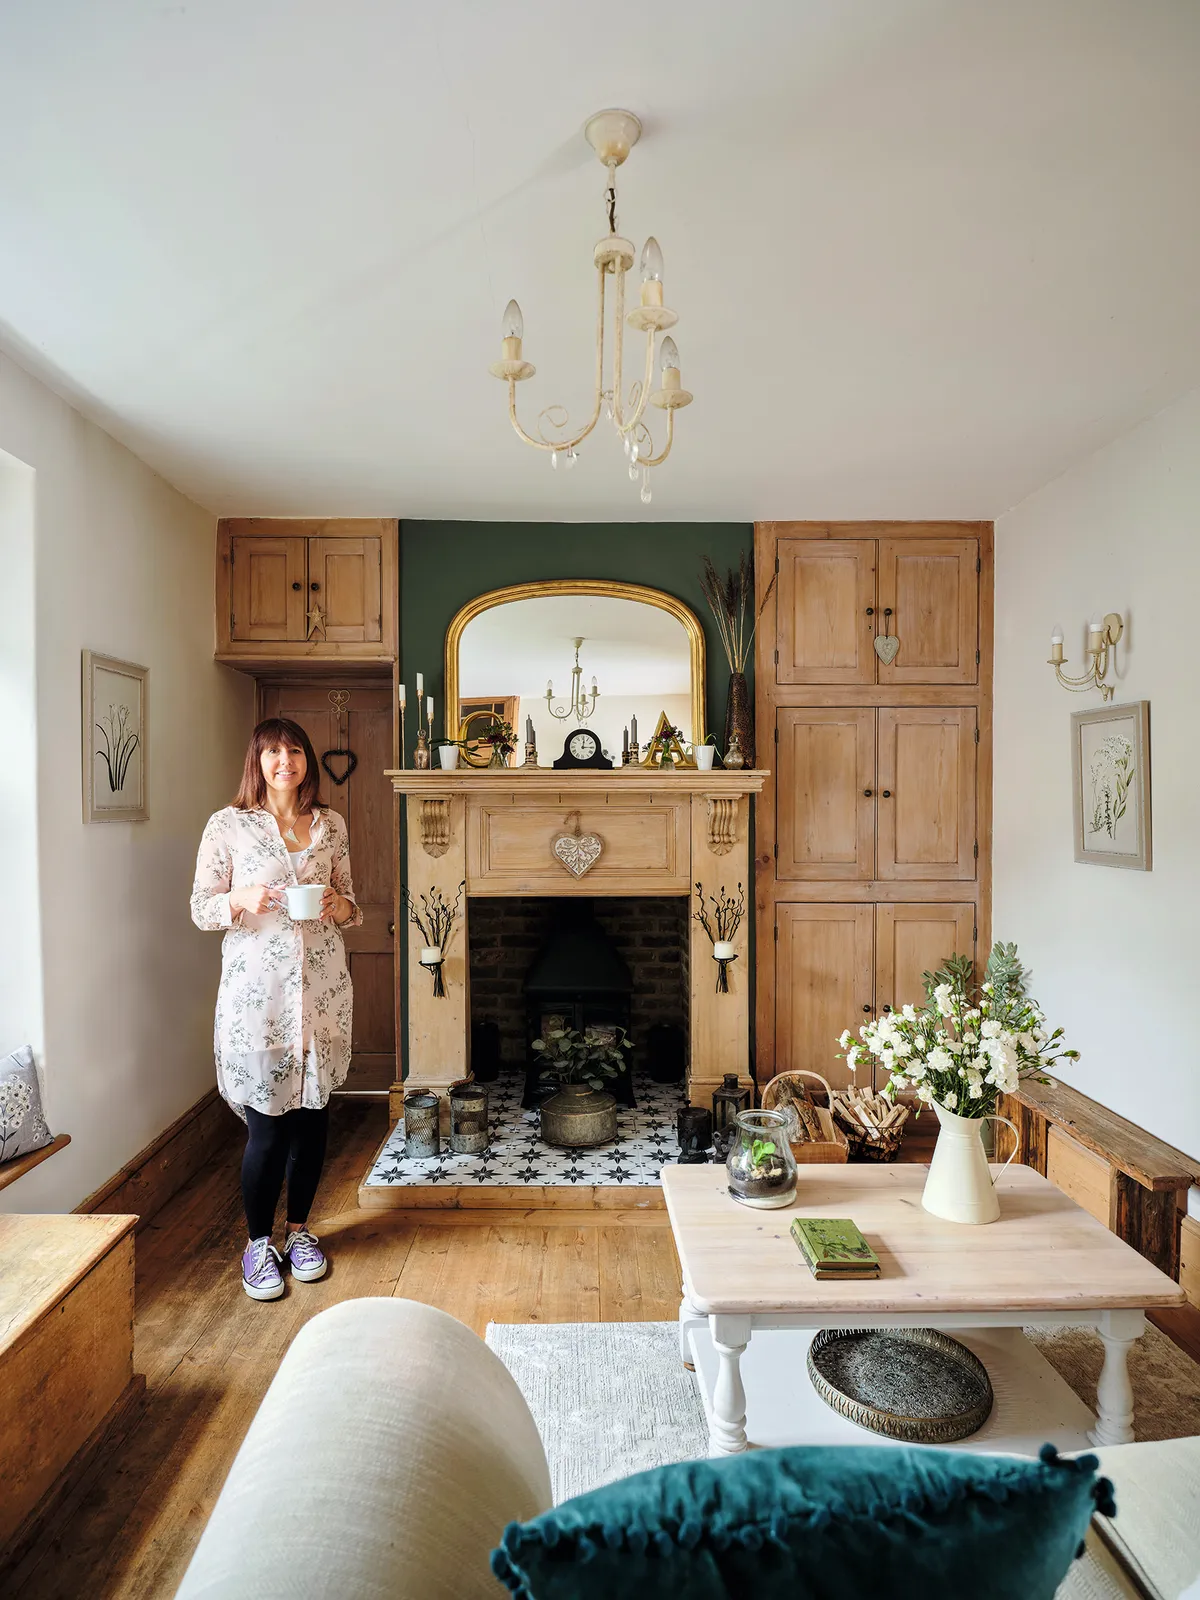 The couple have elevated existing features with DIY updates. ‘I wasn’t keen on the terracotta hearth tiles, so I painted them using a stencil,’ says Ali